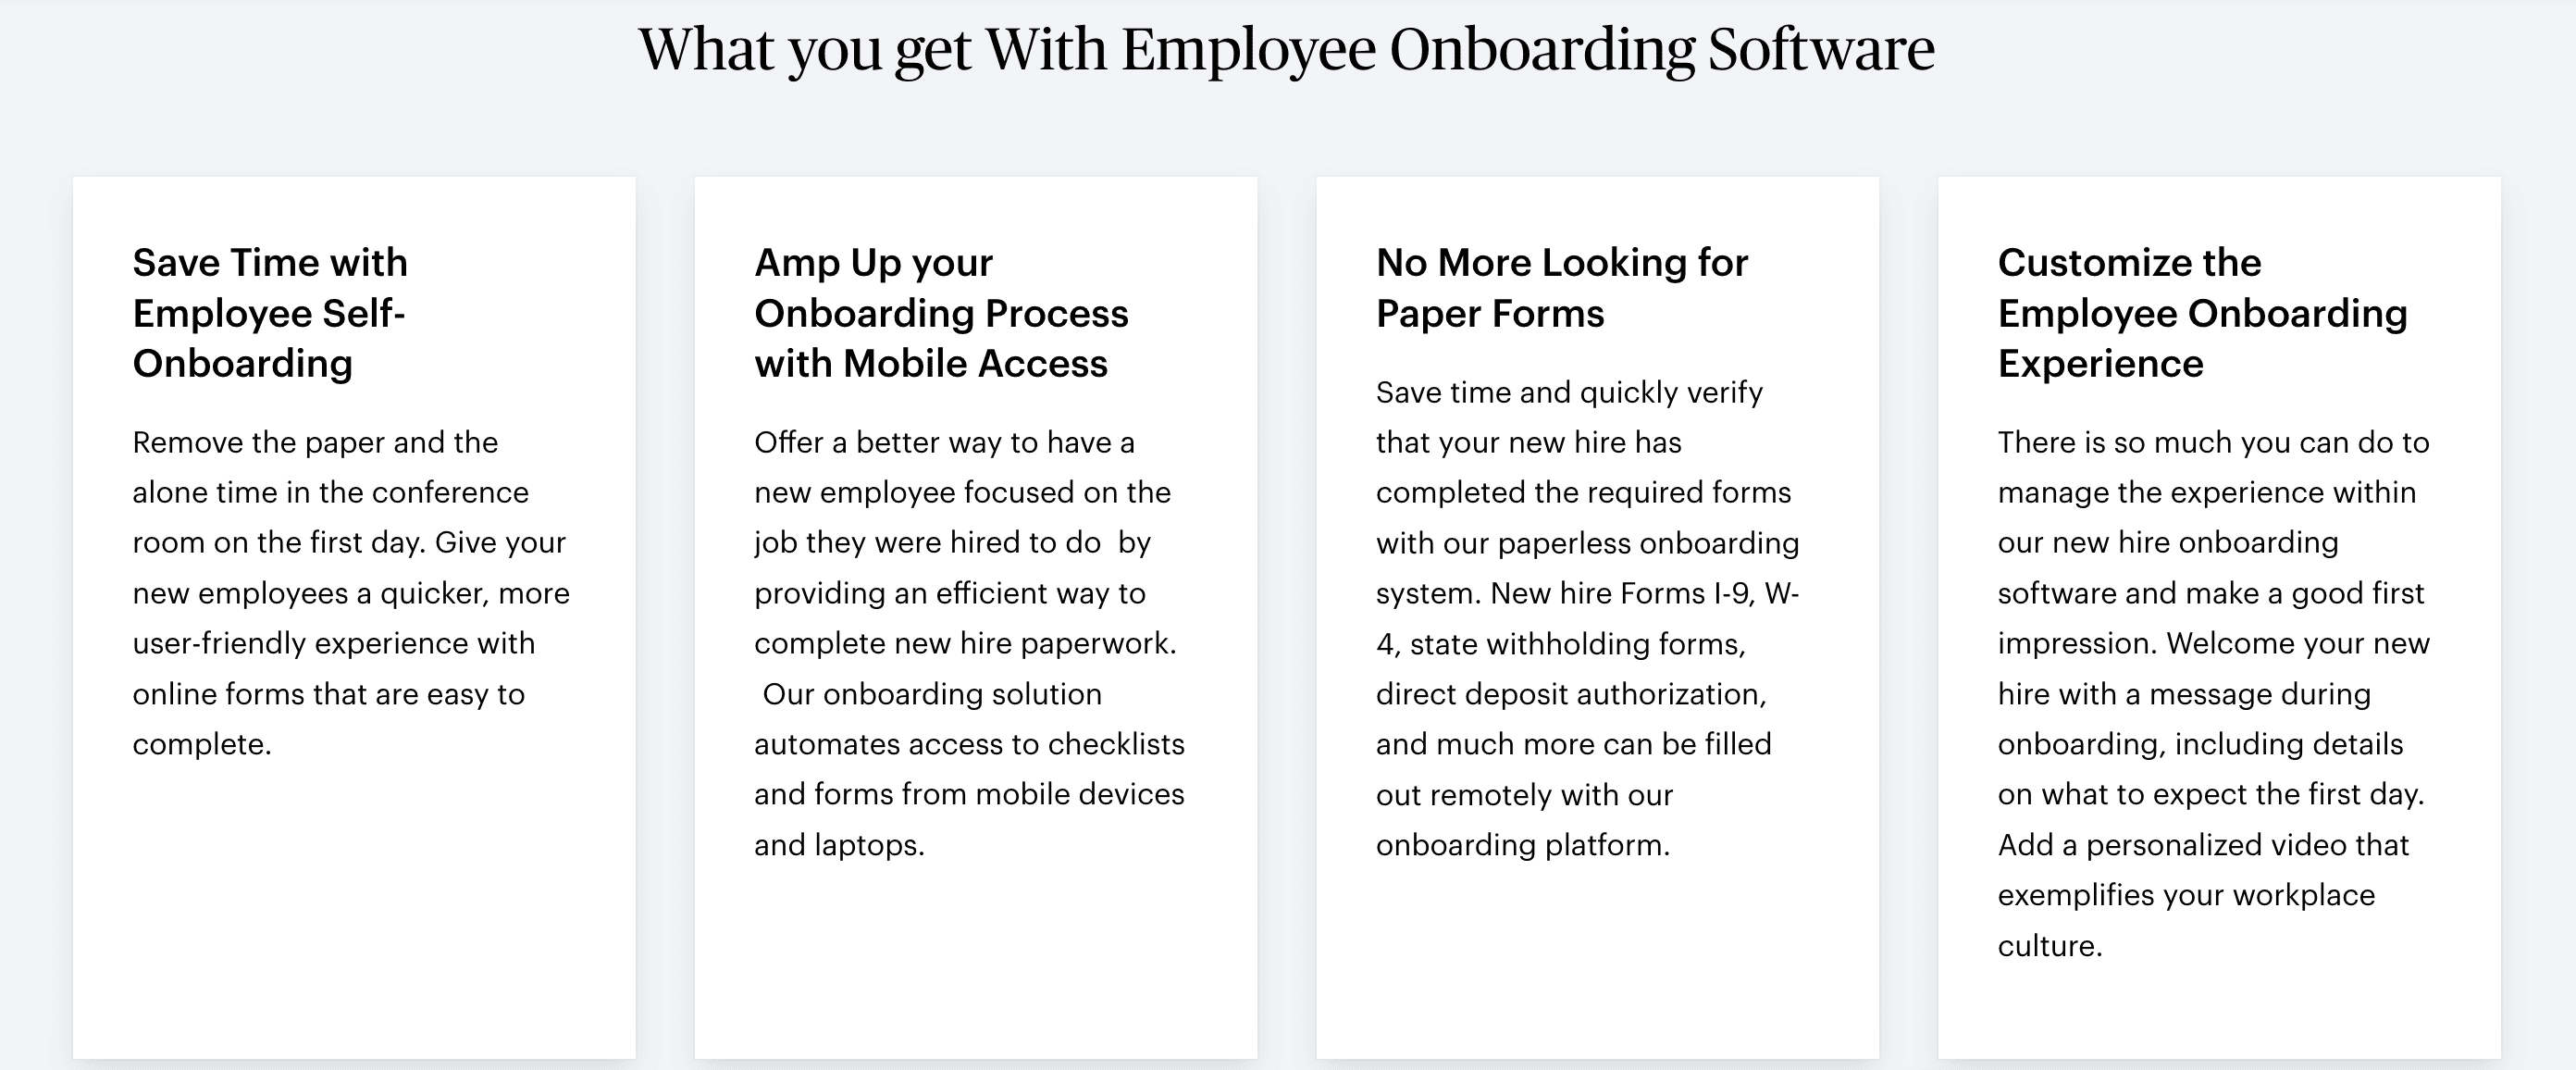 paychex employee onboarding software features